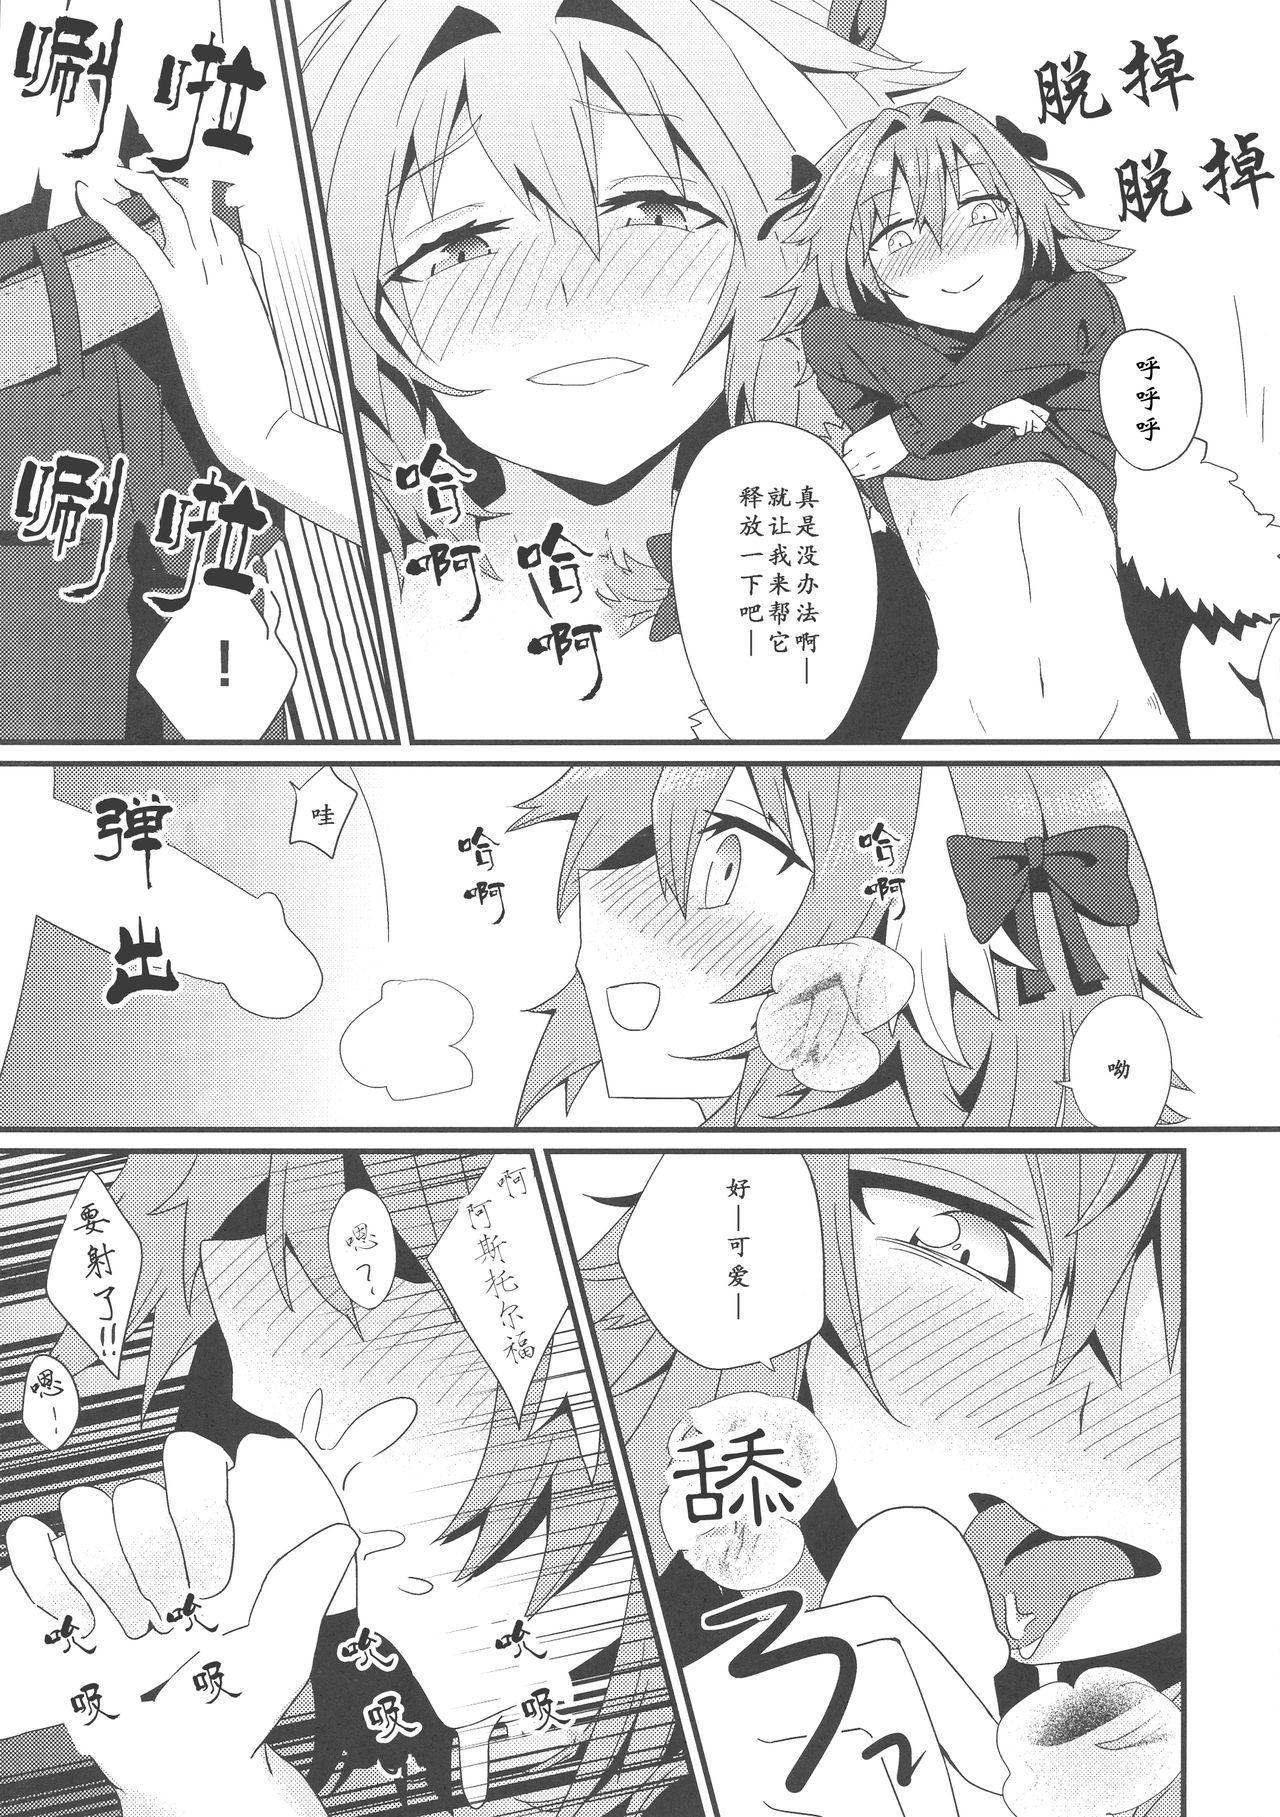 Free Fucking Astolfo to Yoru no Chaldea - Fate grand order 18 Year Old Porn - Page 10